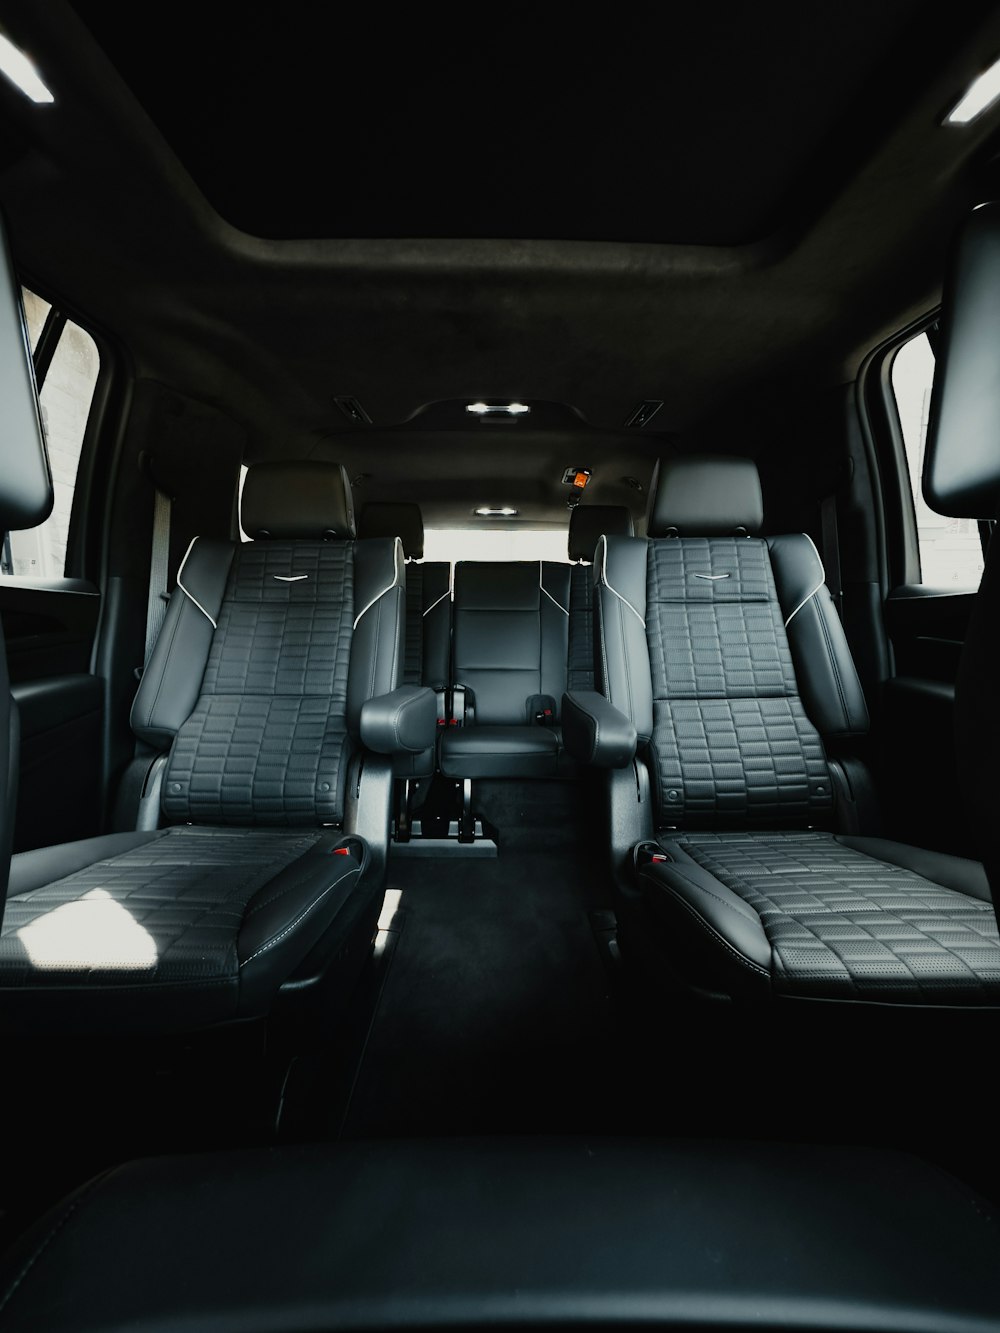 the interior of a vehicle with black leather seats